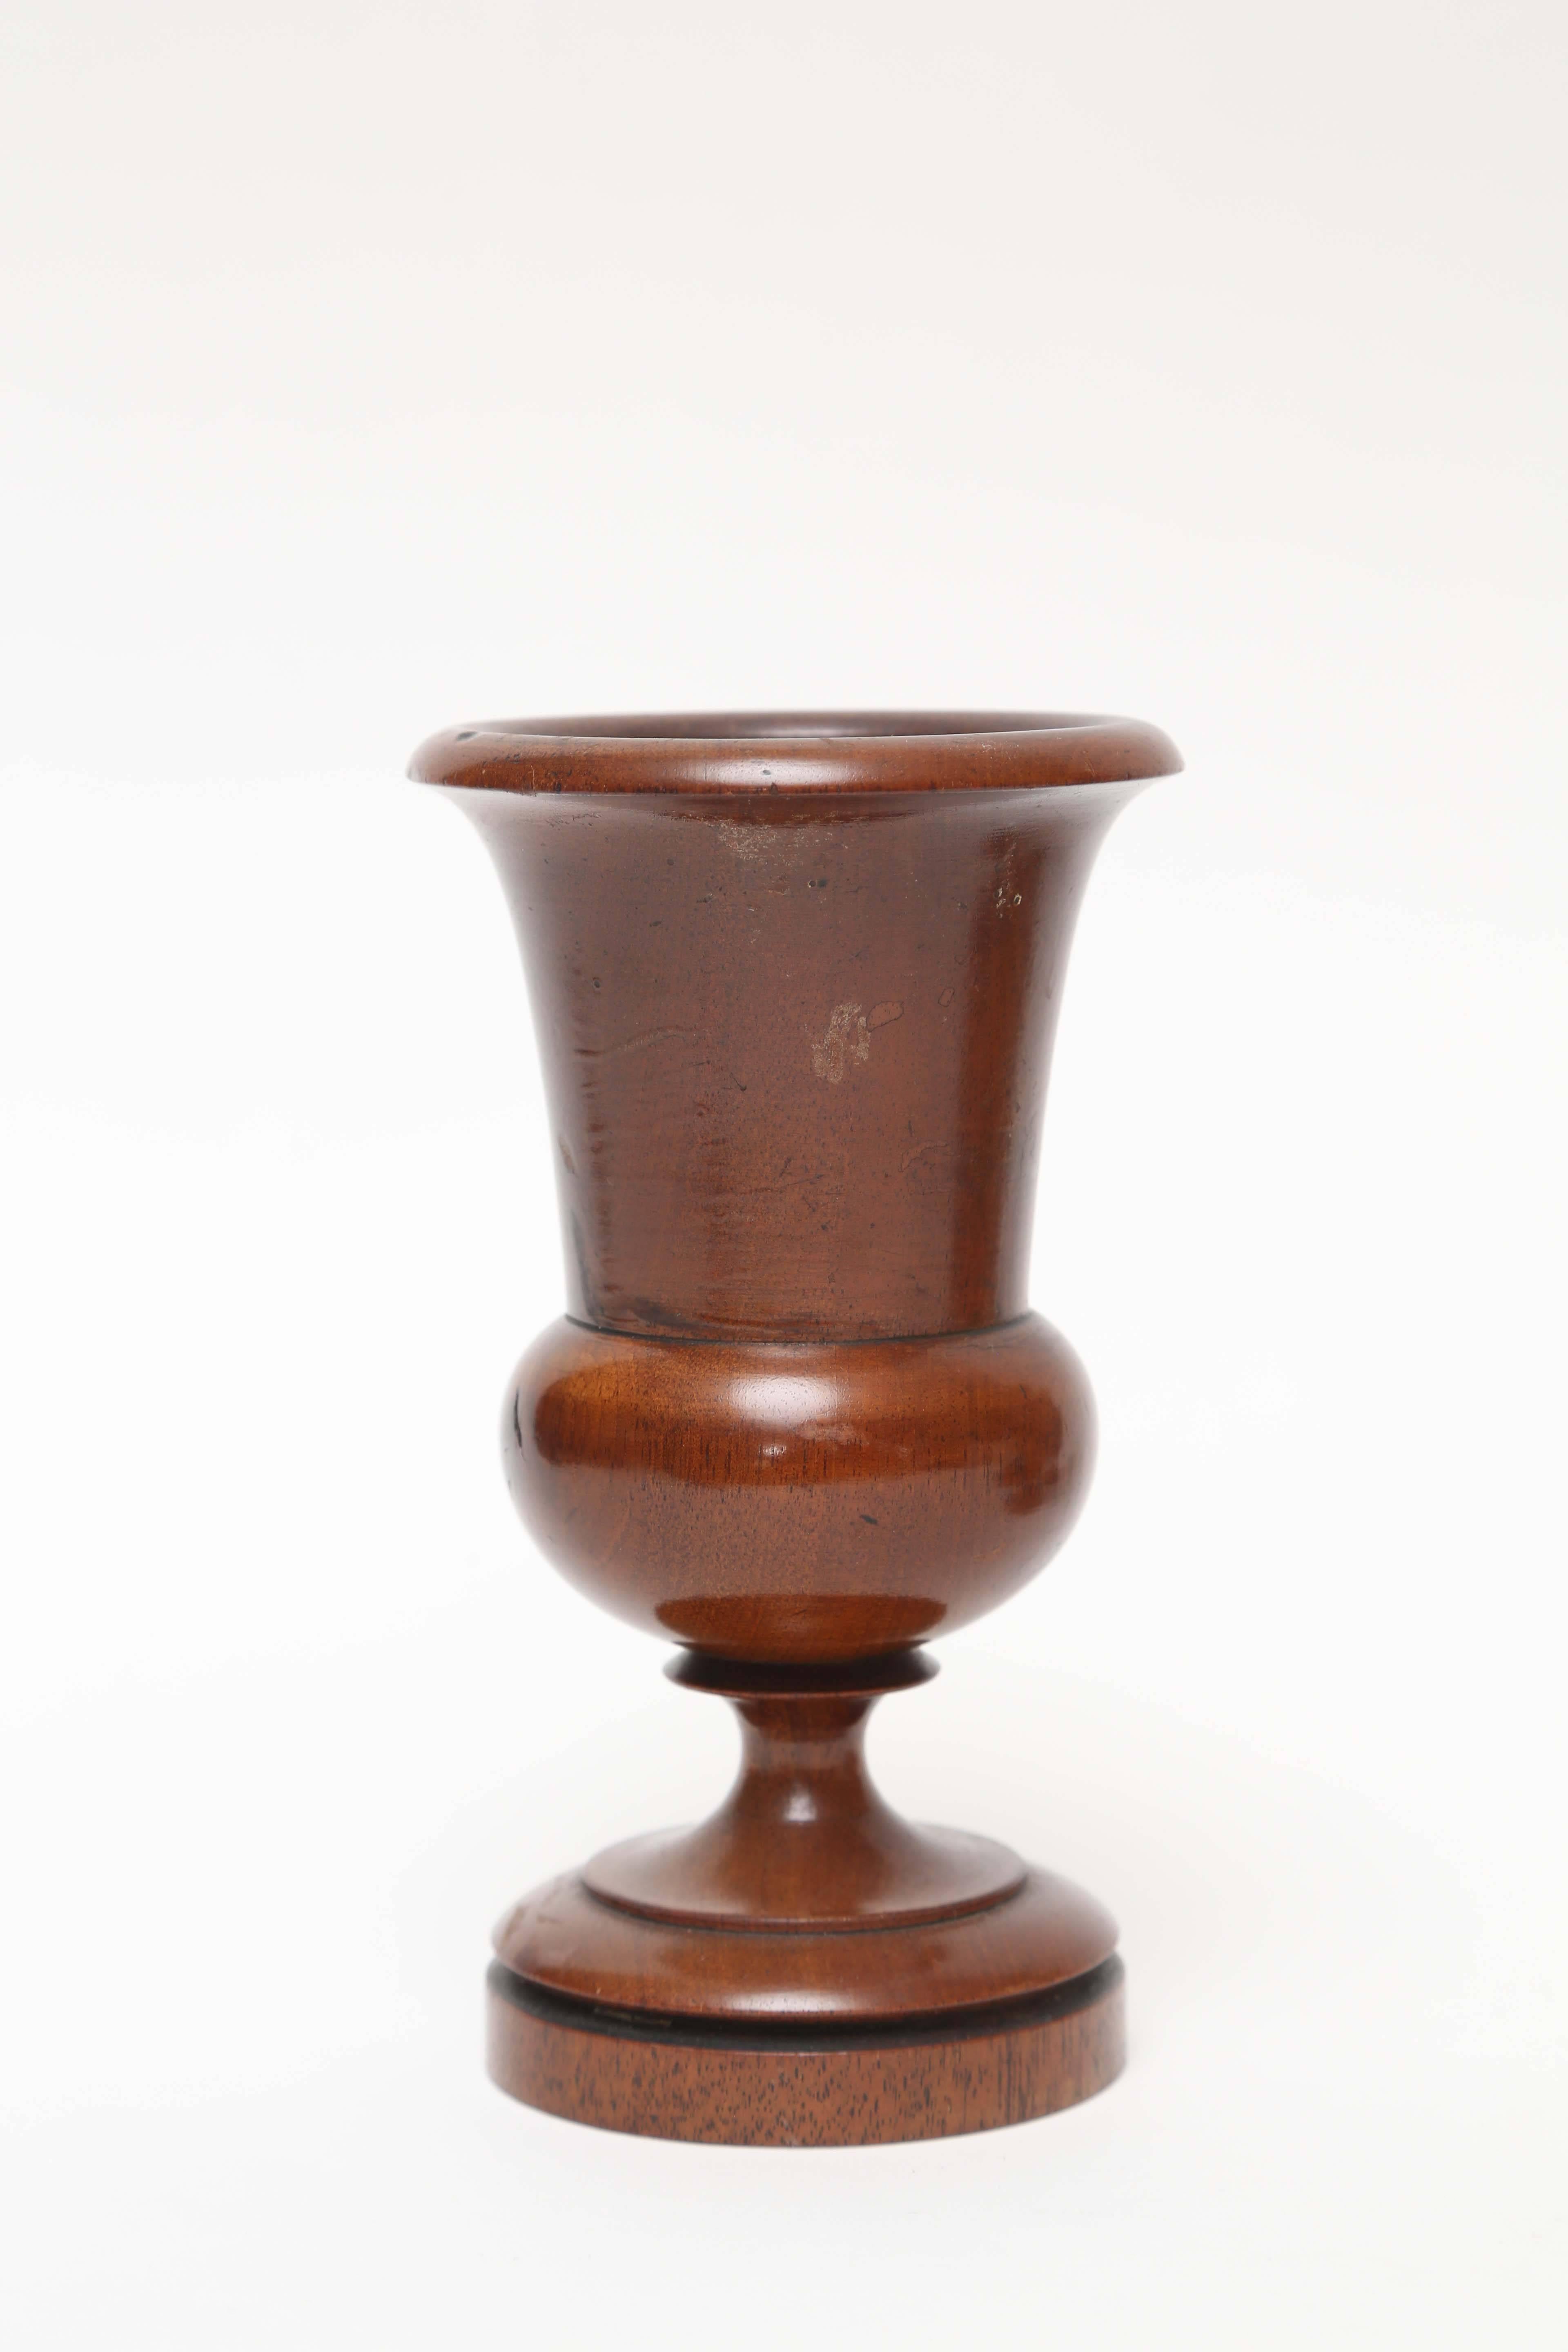 Neoclassical Revival Group of Treens, Candlestick and Alabaster Cup, 19th-20th Century